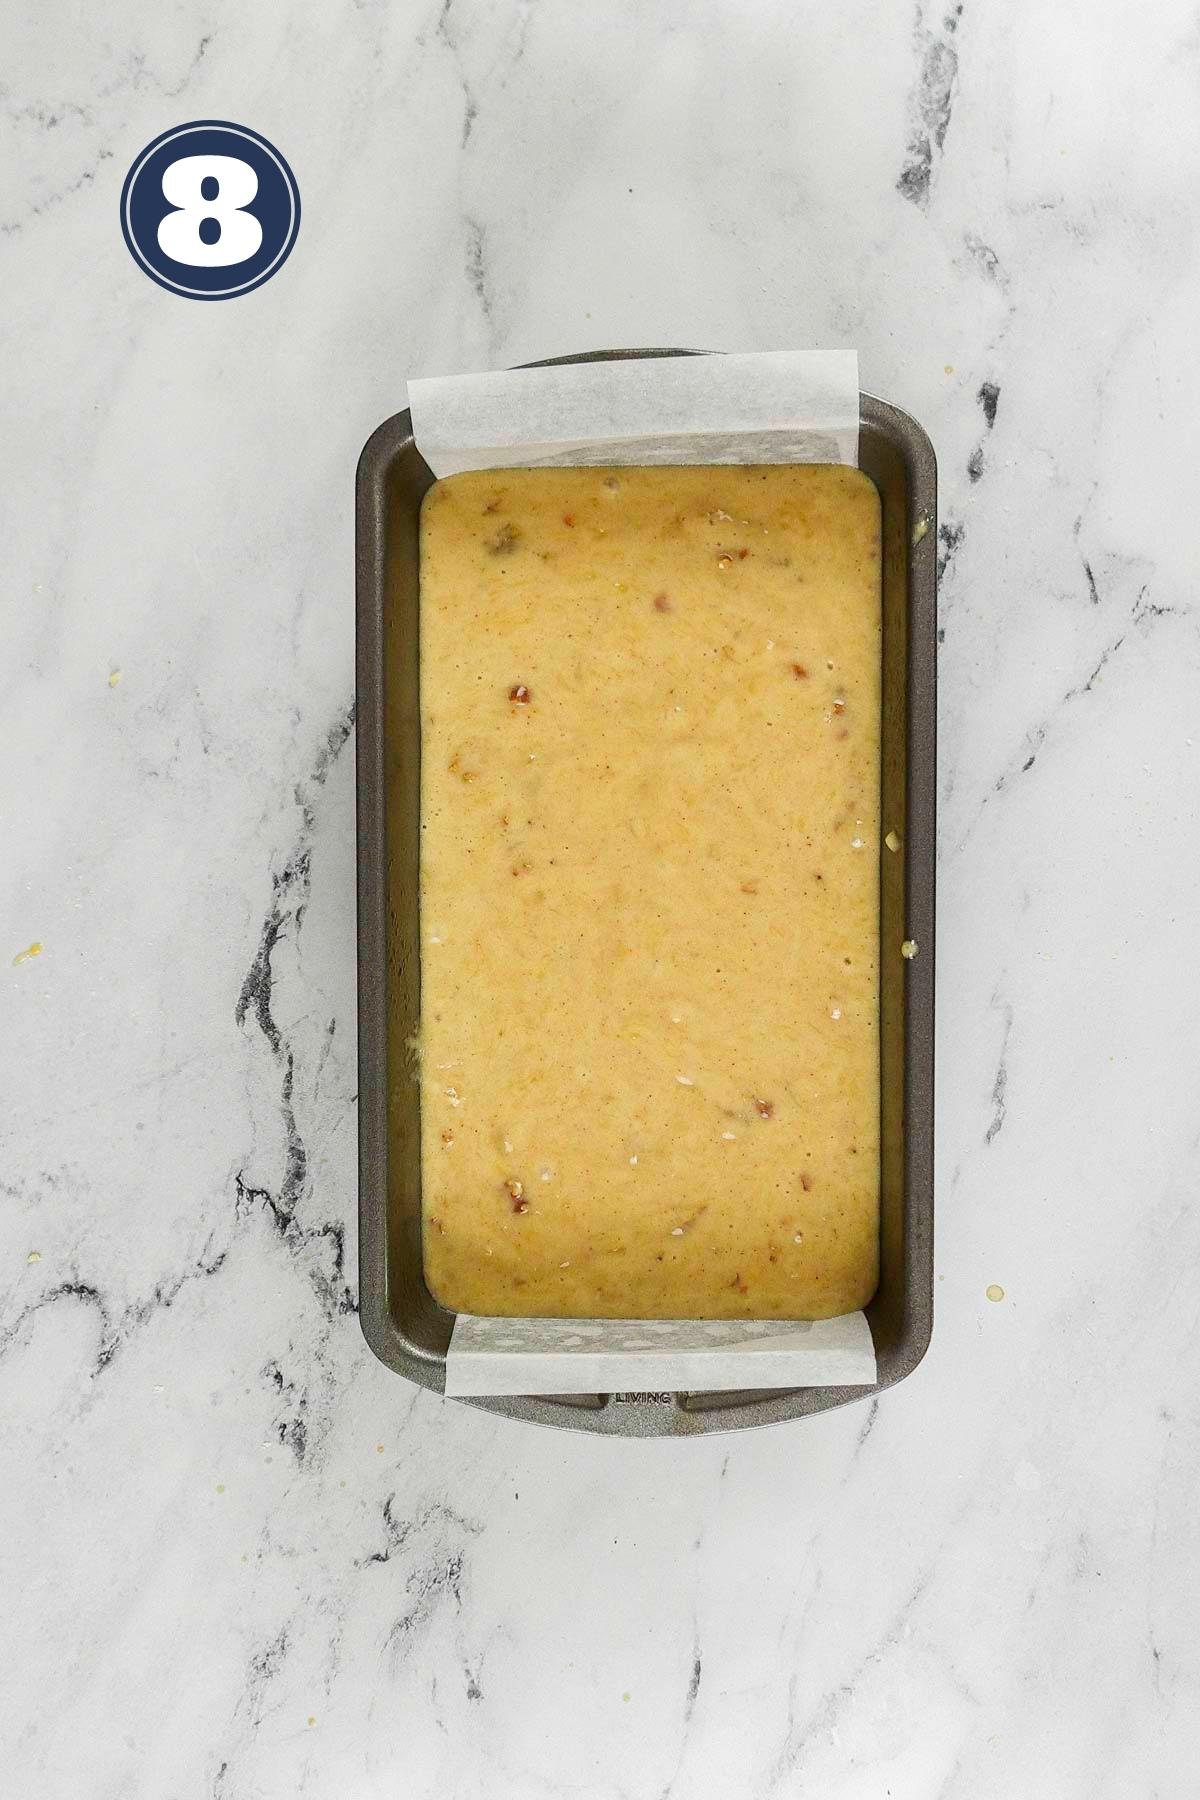 banana bread batter poured into 9 x 5 inch pan and ready to go to the oven.